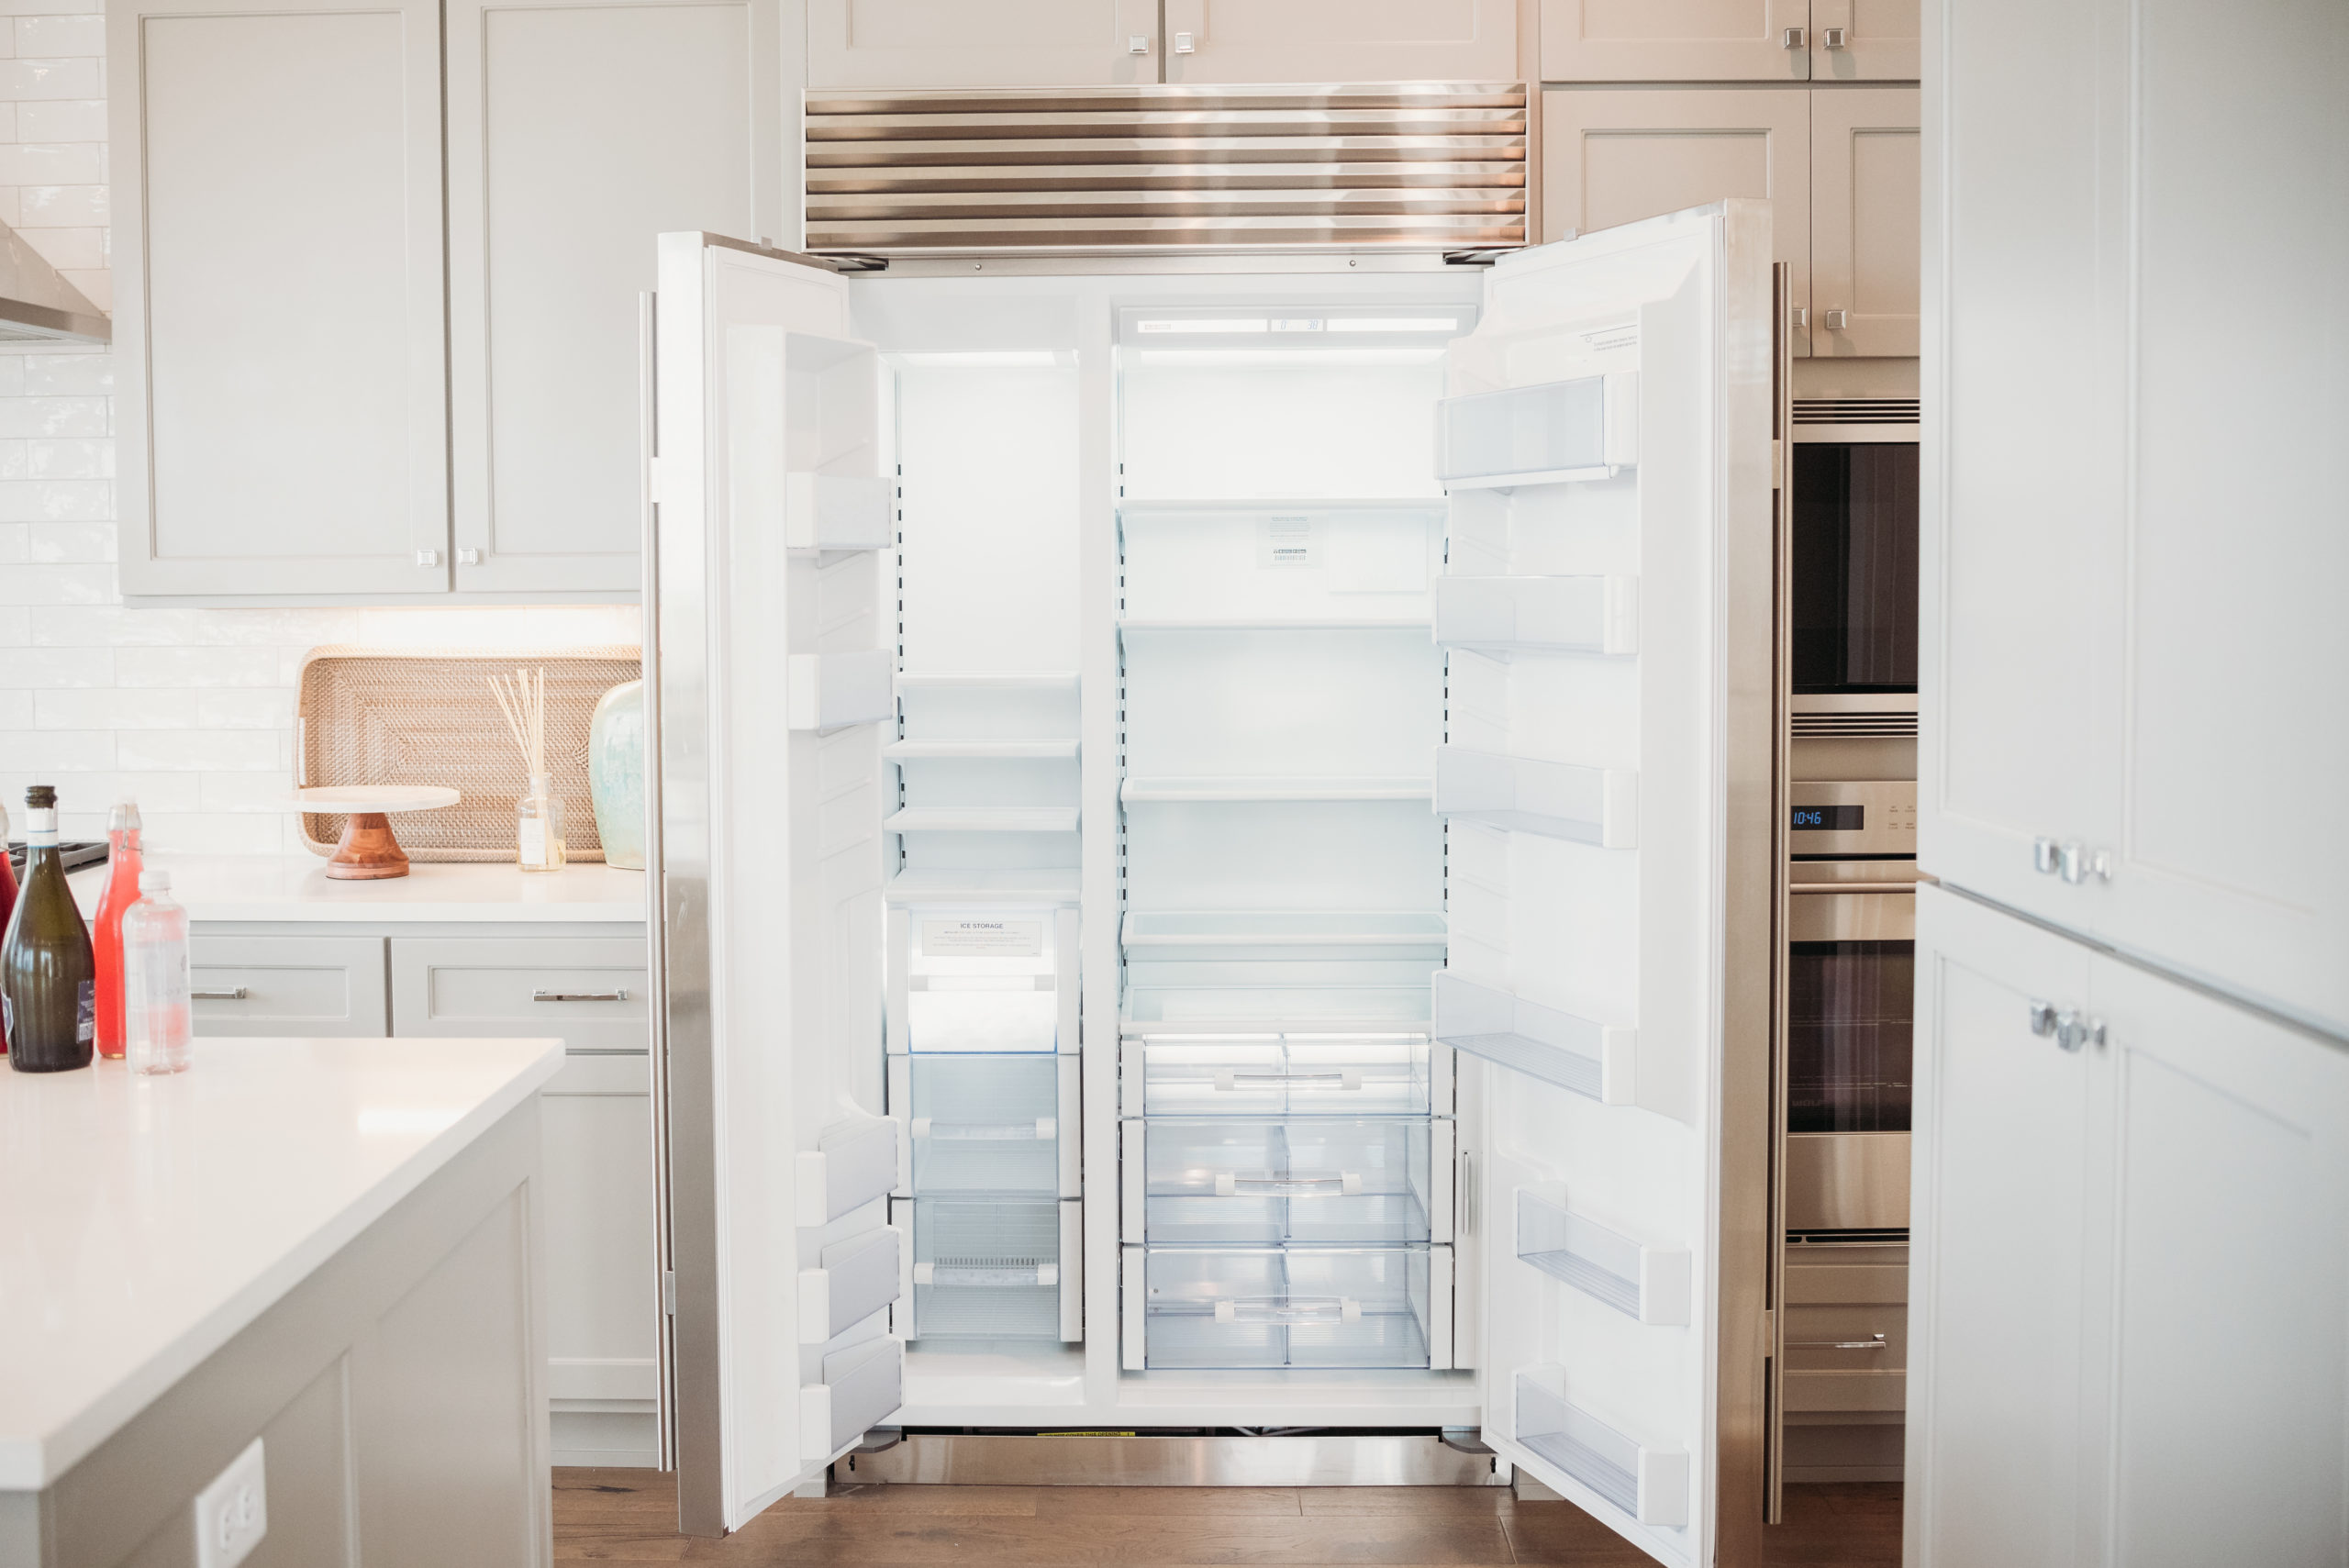 Interior of the high end fridge featured in the kitchen of condos at the Corvalla